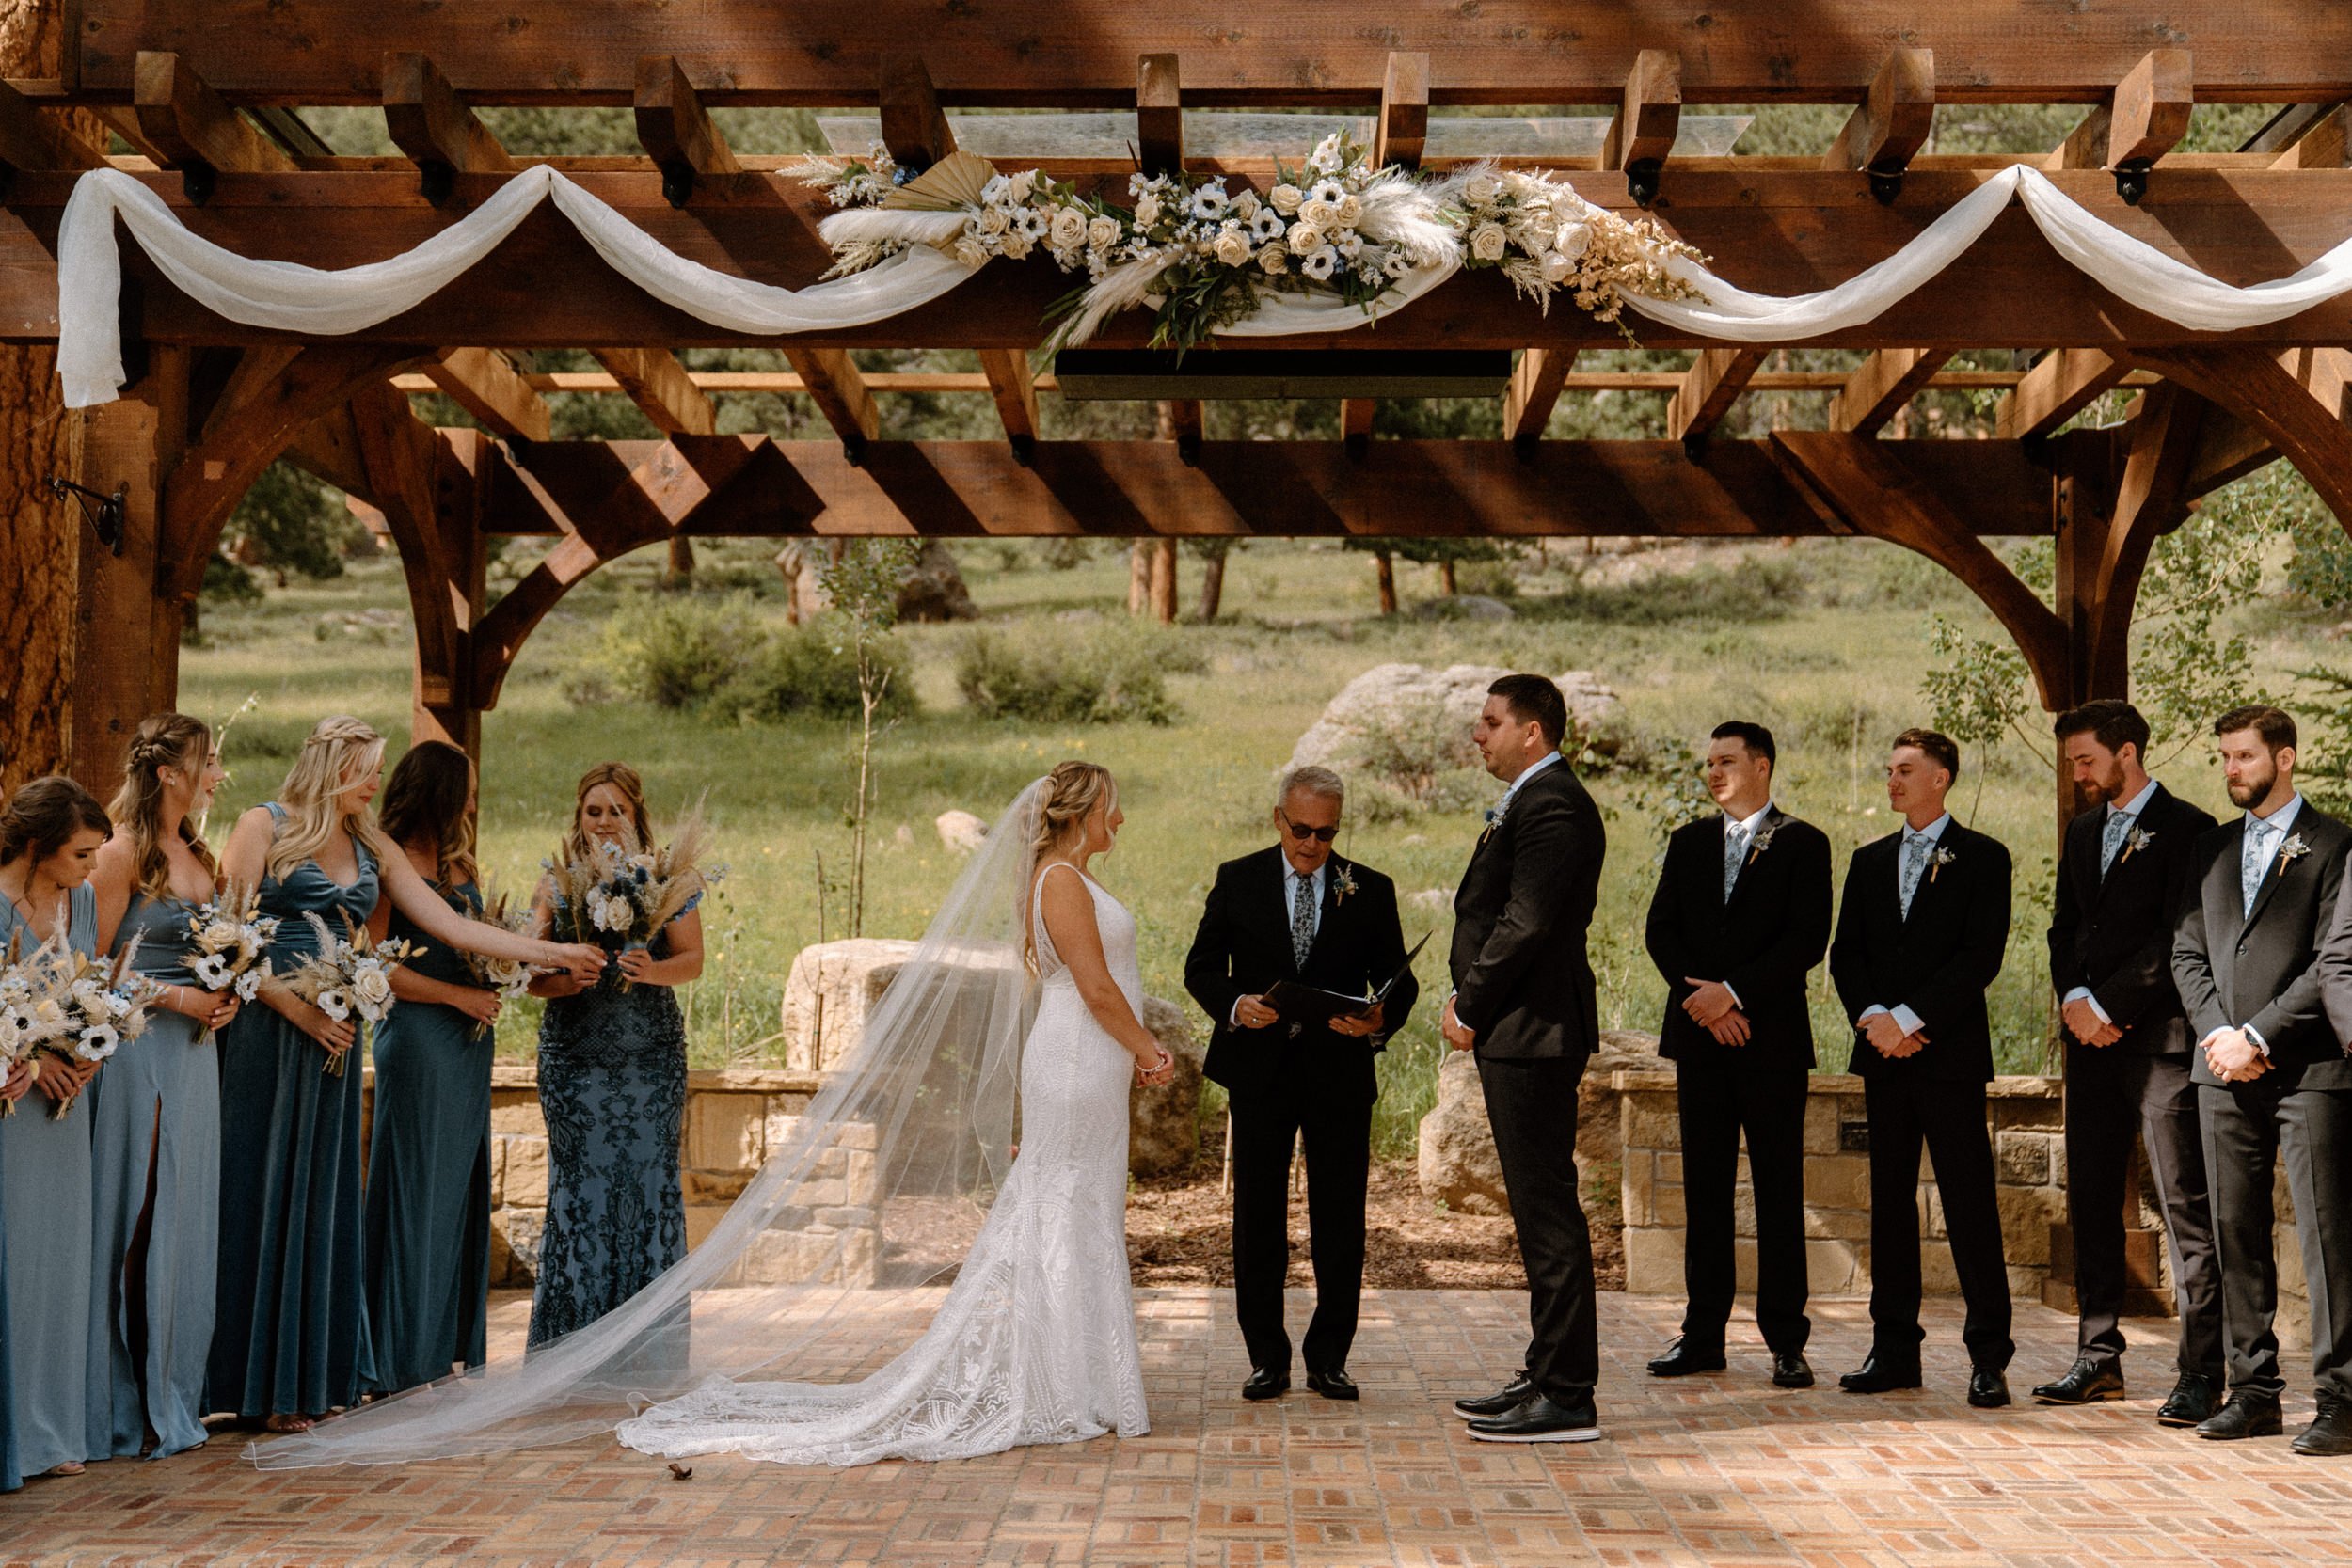 The bride and groom stand at the altar together at Della Terra Mountain Chateau in Estes Park, CO